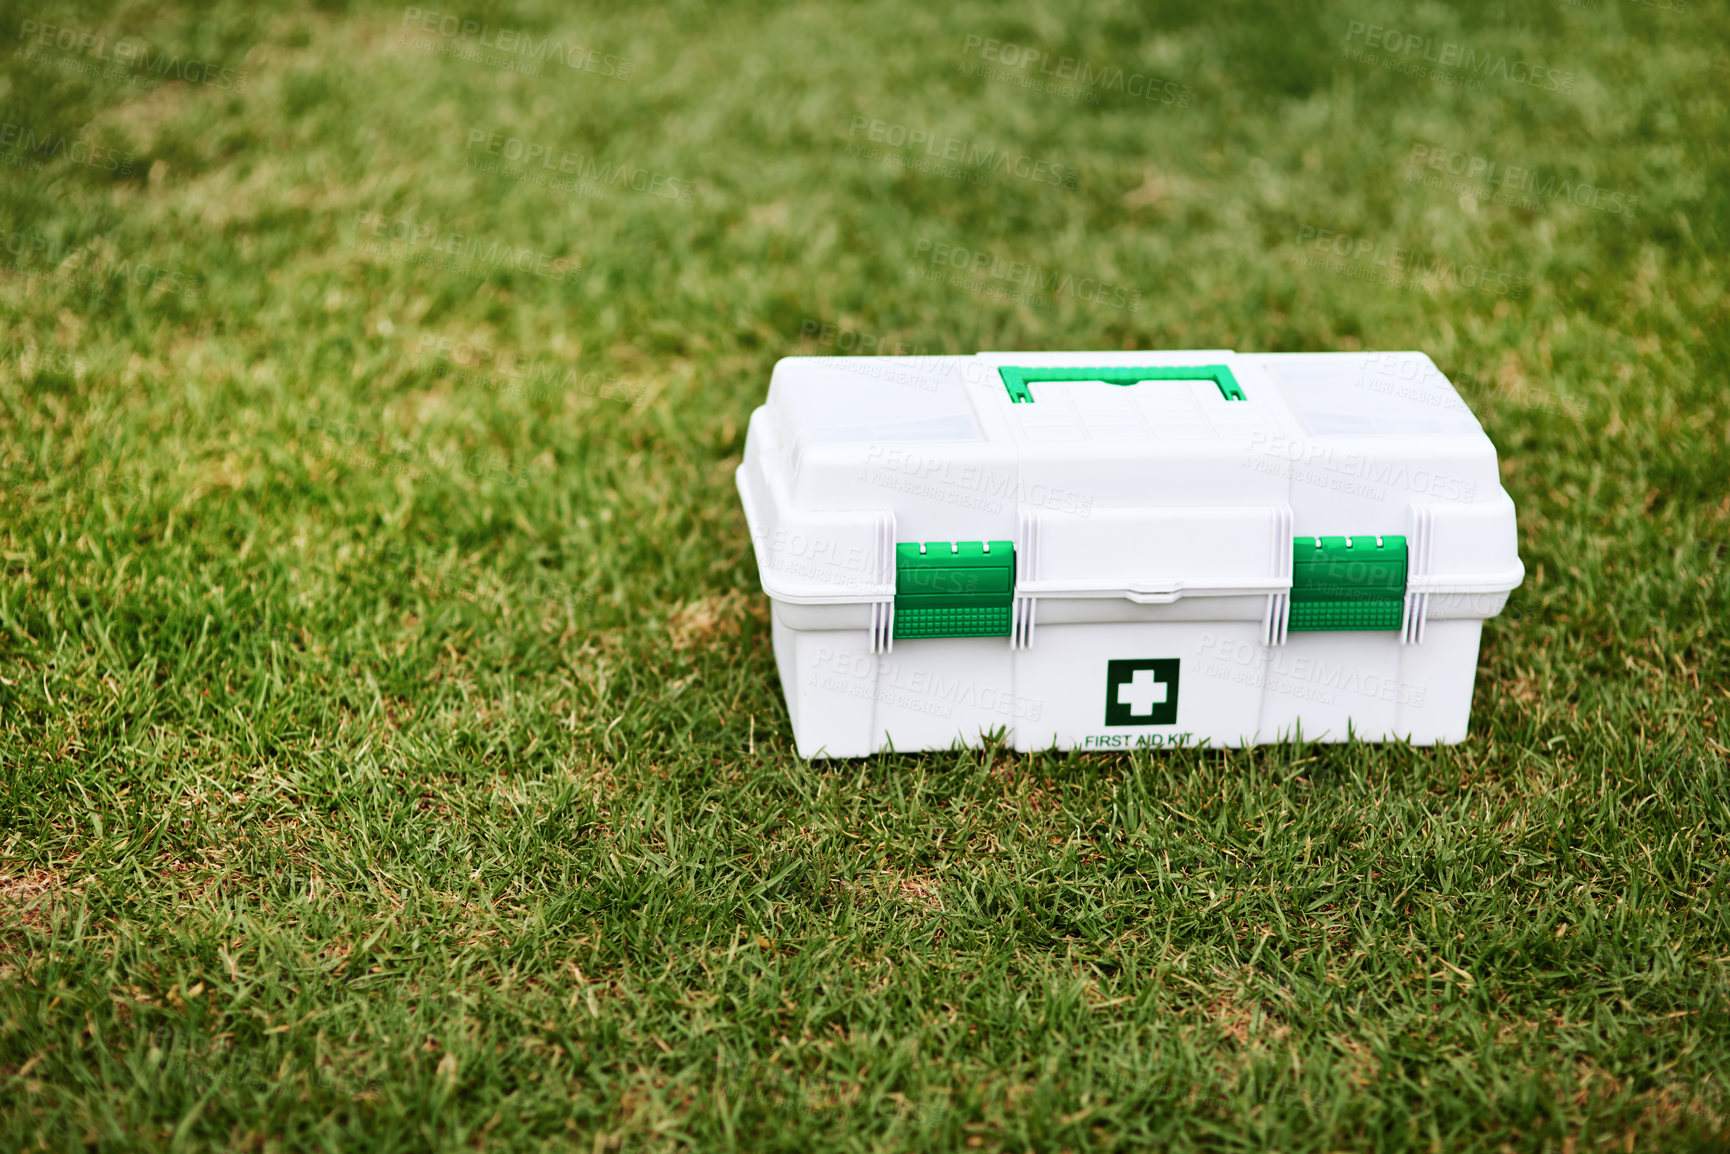 Buy stock photo Shot of a first aid kit on a rugby field